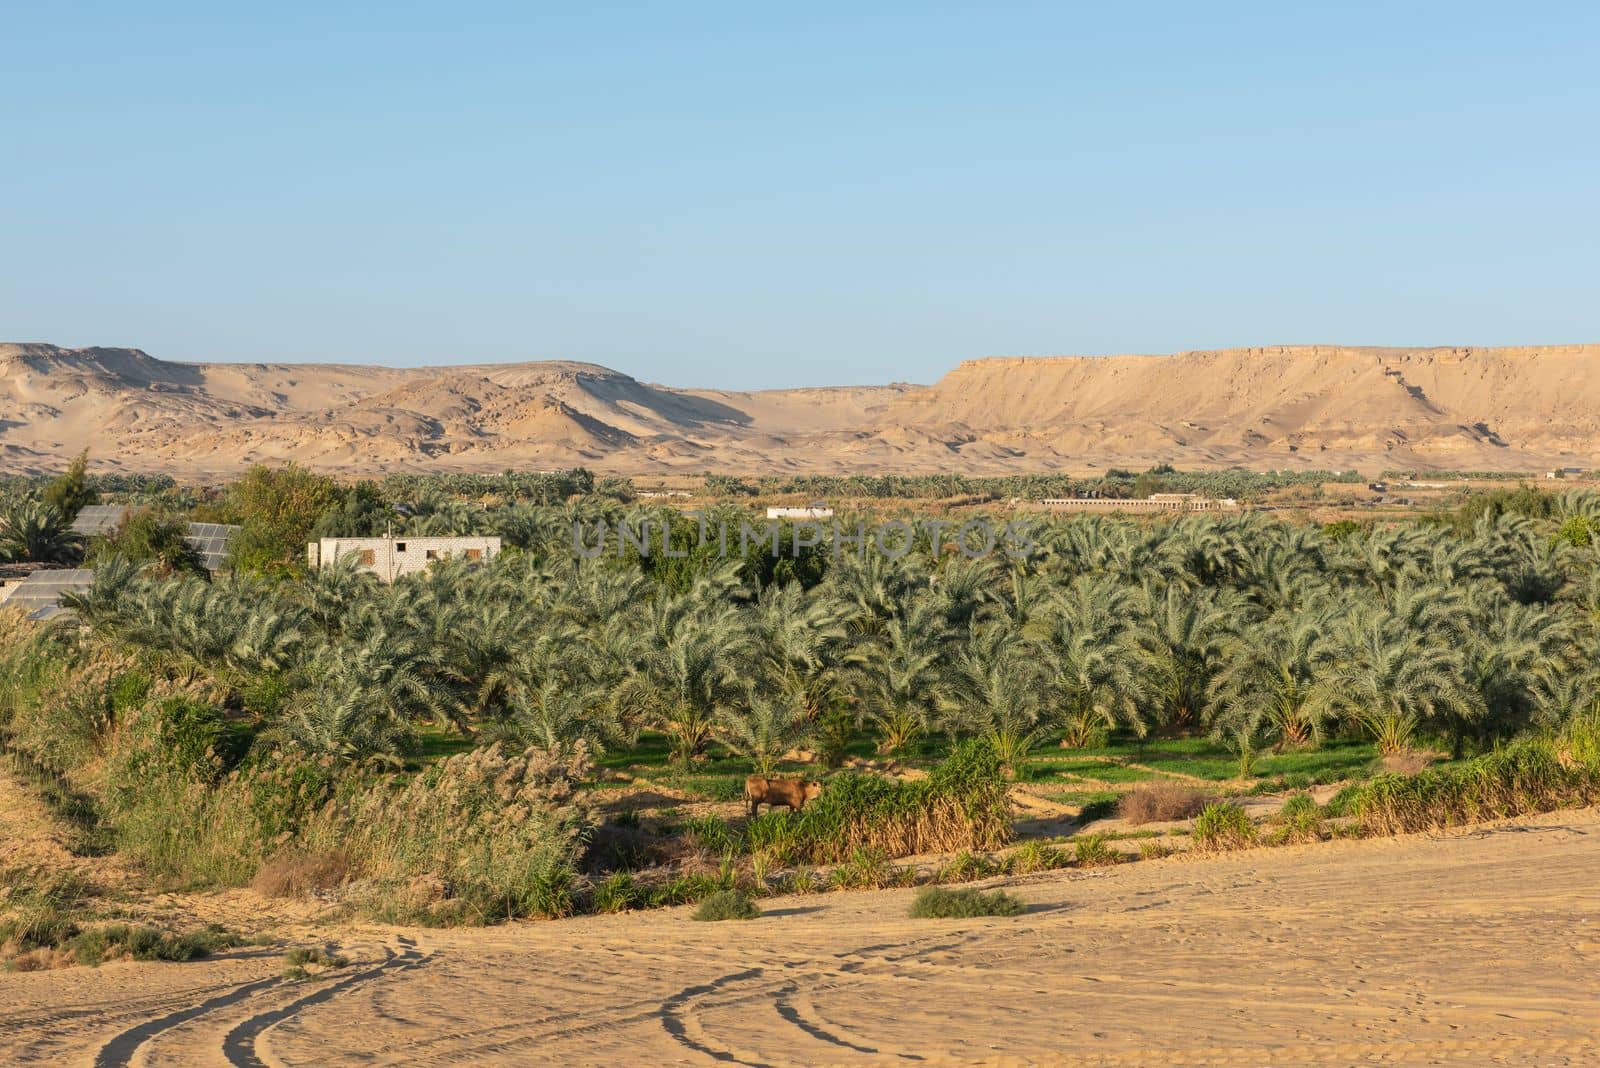 Panoramic view over remote african egyptian desert landscape with oasis and large date palm farm plantation